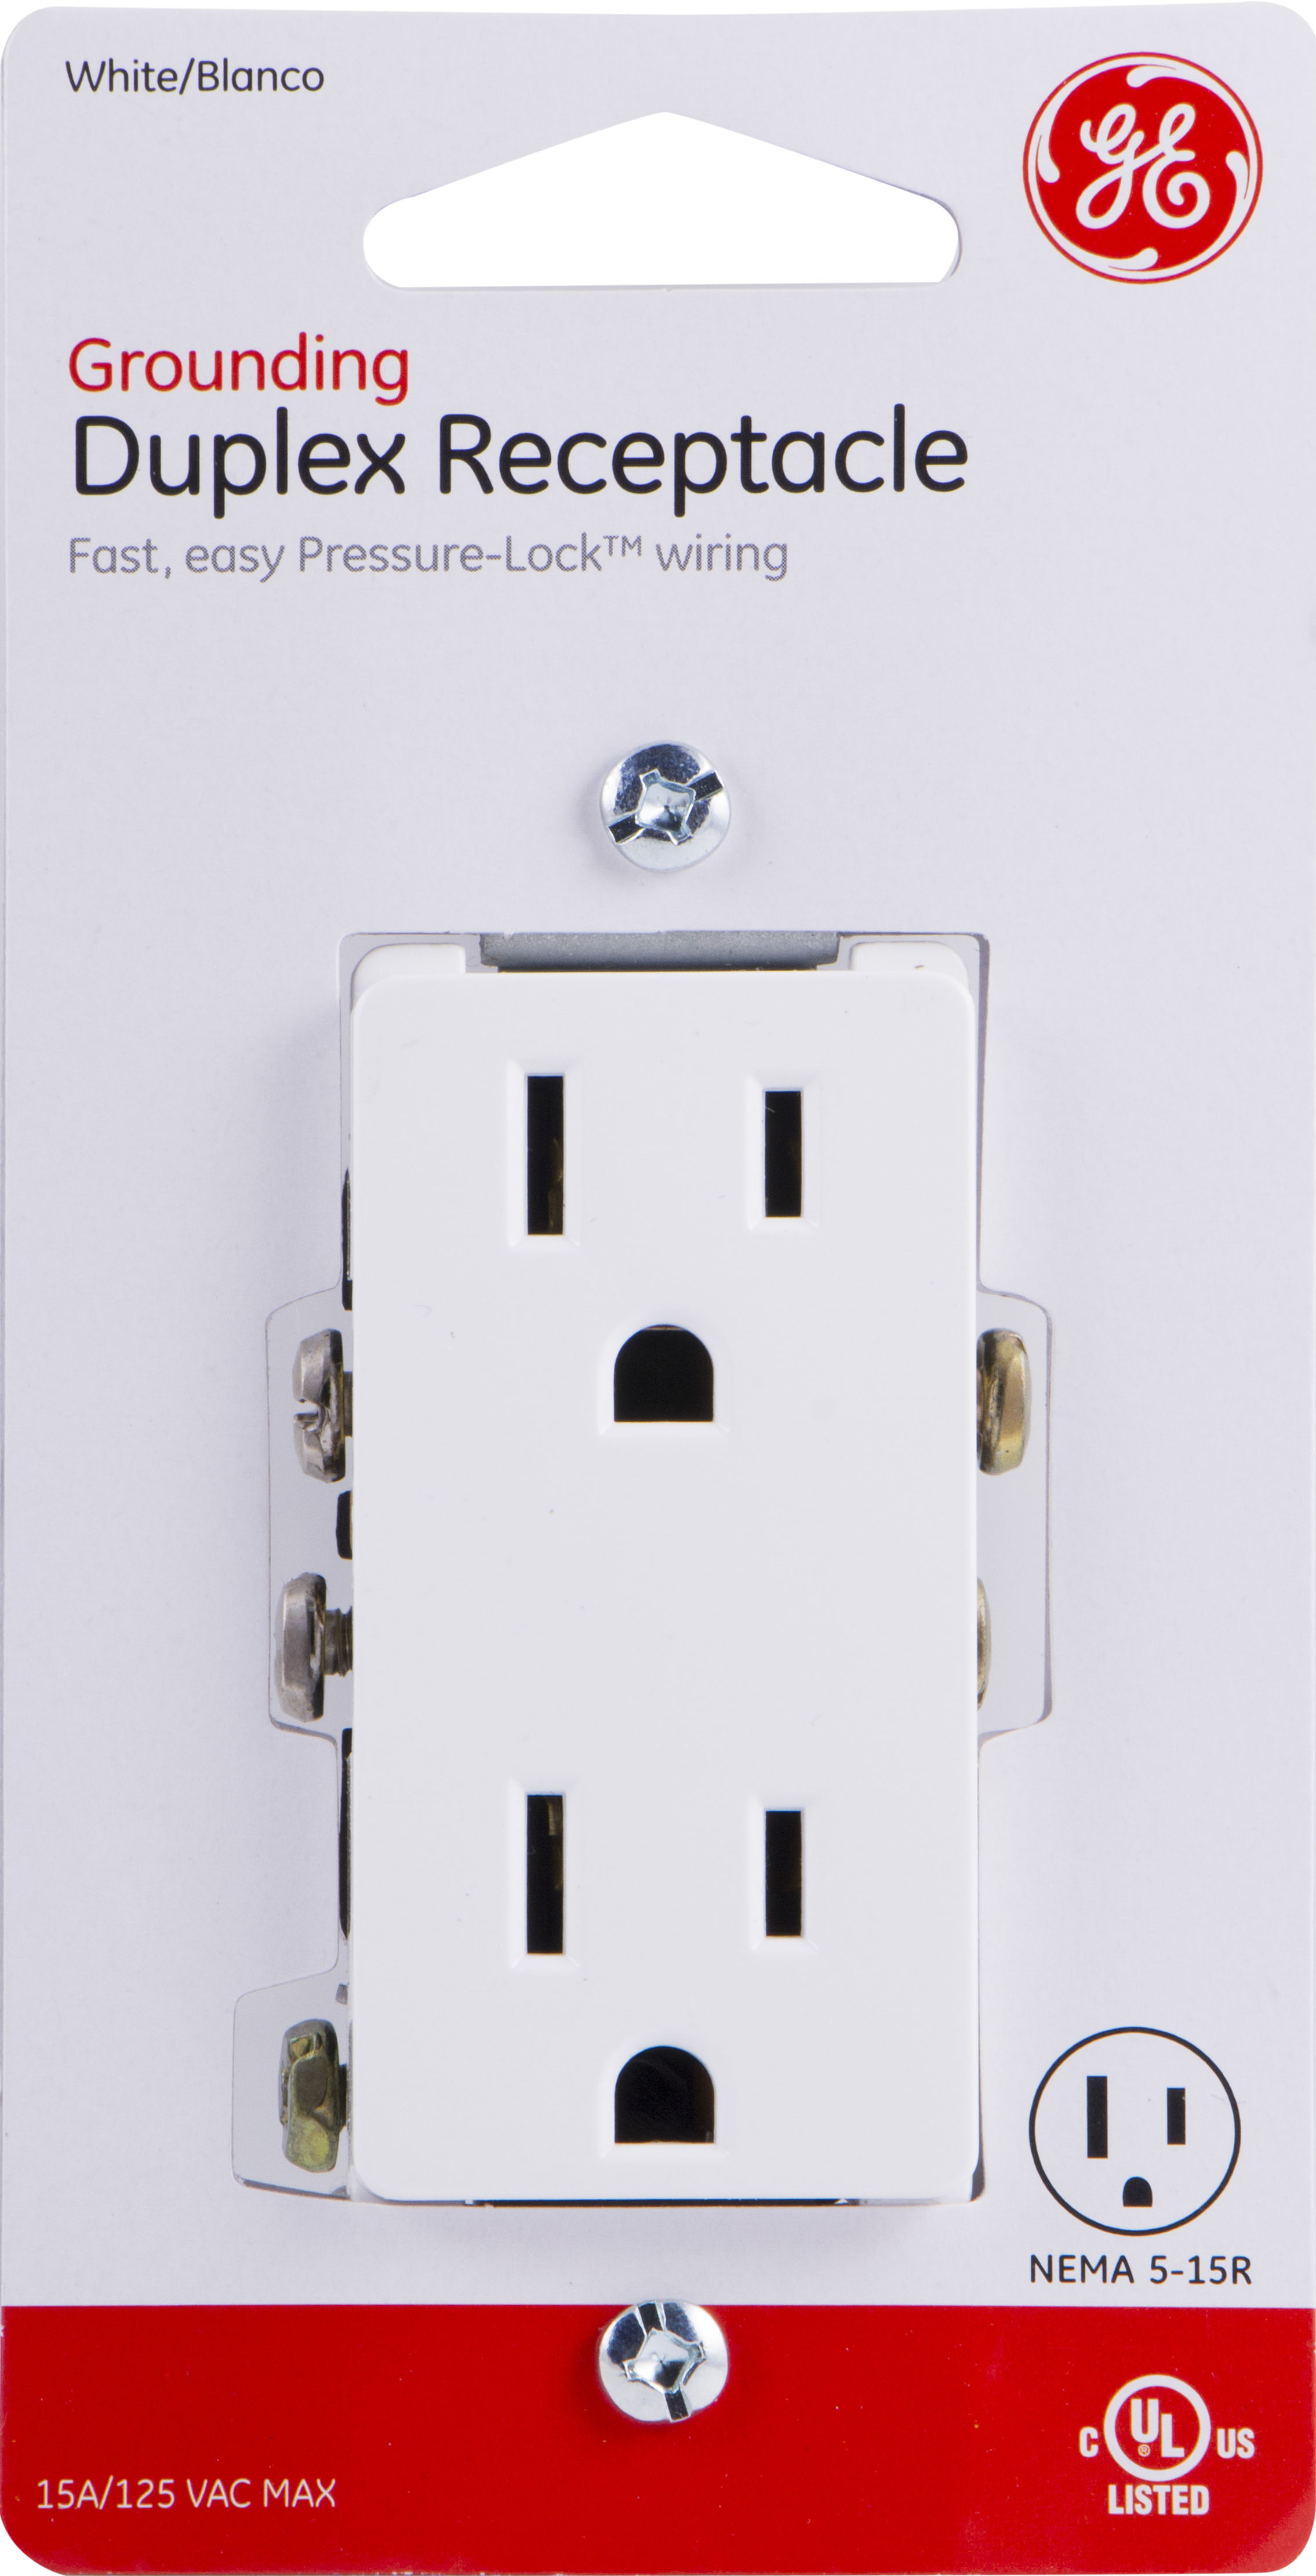 GE Grounding Designer Duplex Electrical Outlet, White 15A - 50727 - image 2 of 5